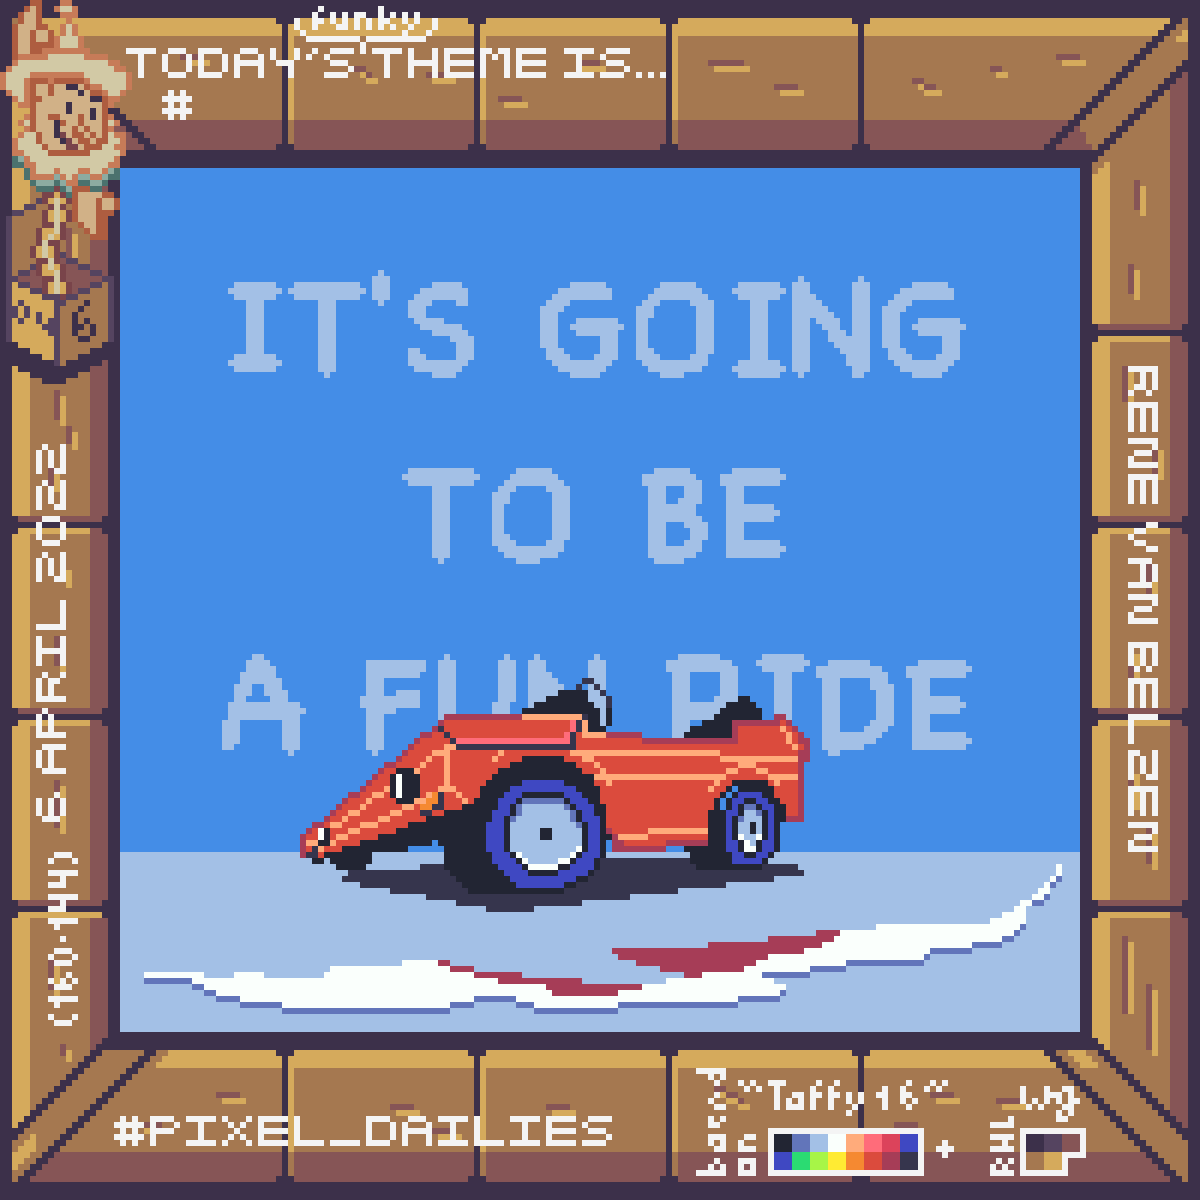 pixel art tiny red car in heavy perspective and a text behind it indicating a fun ride